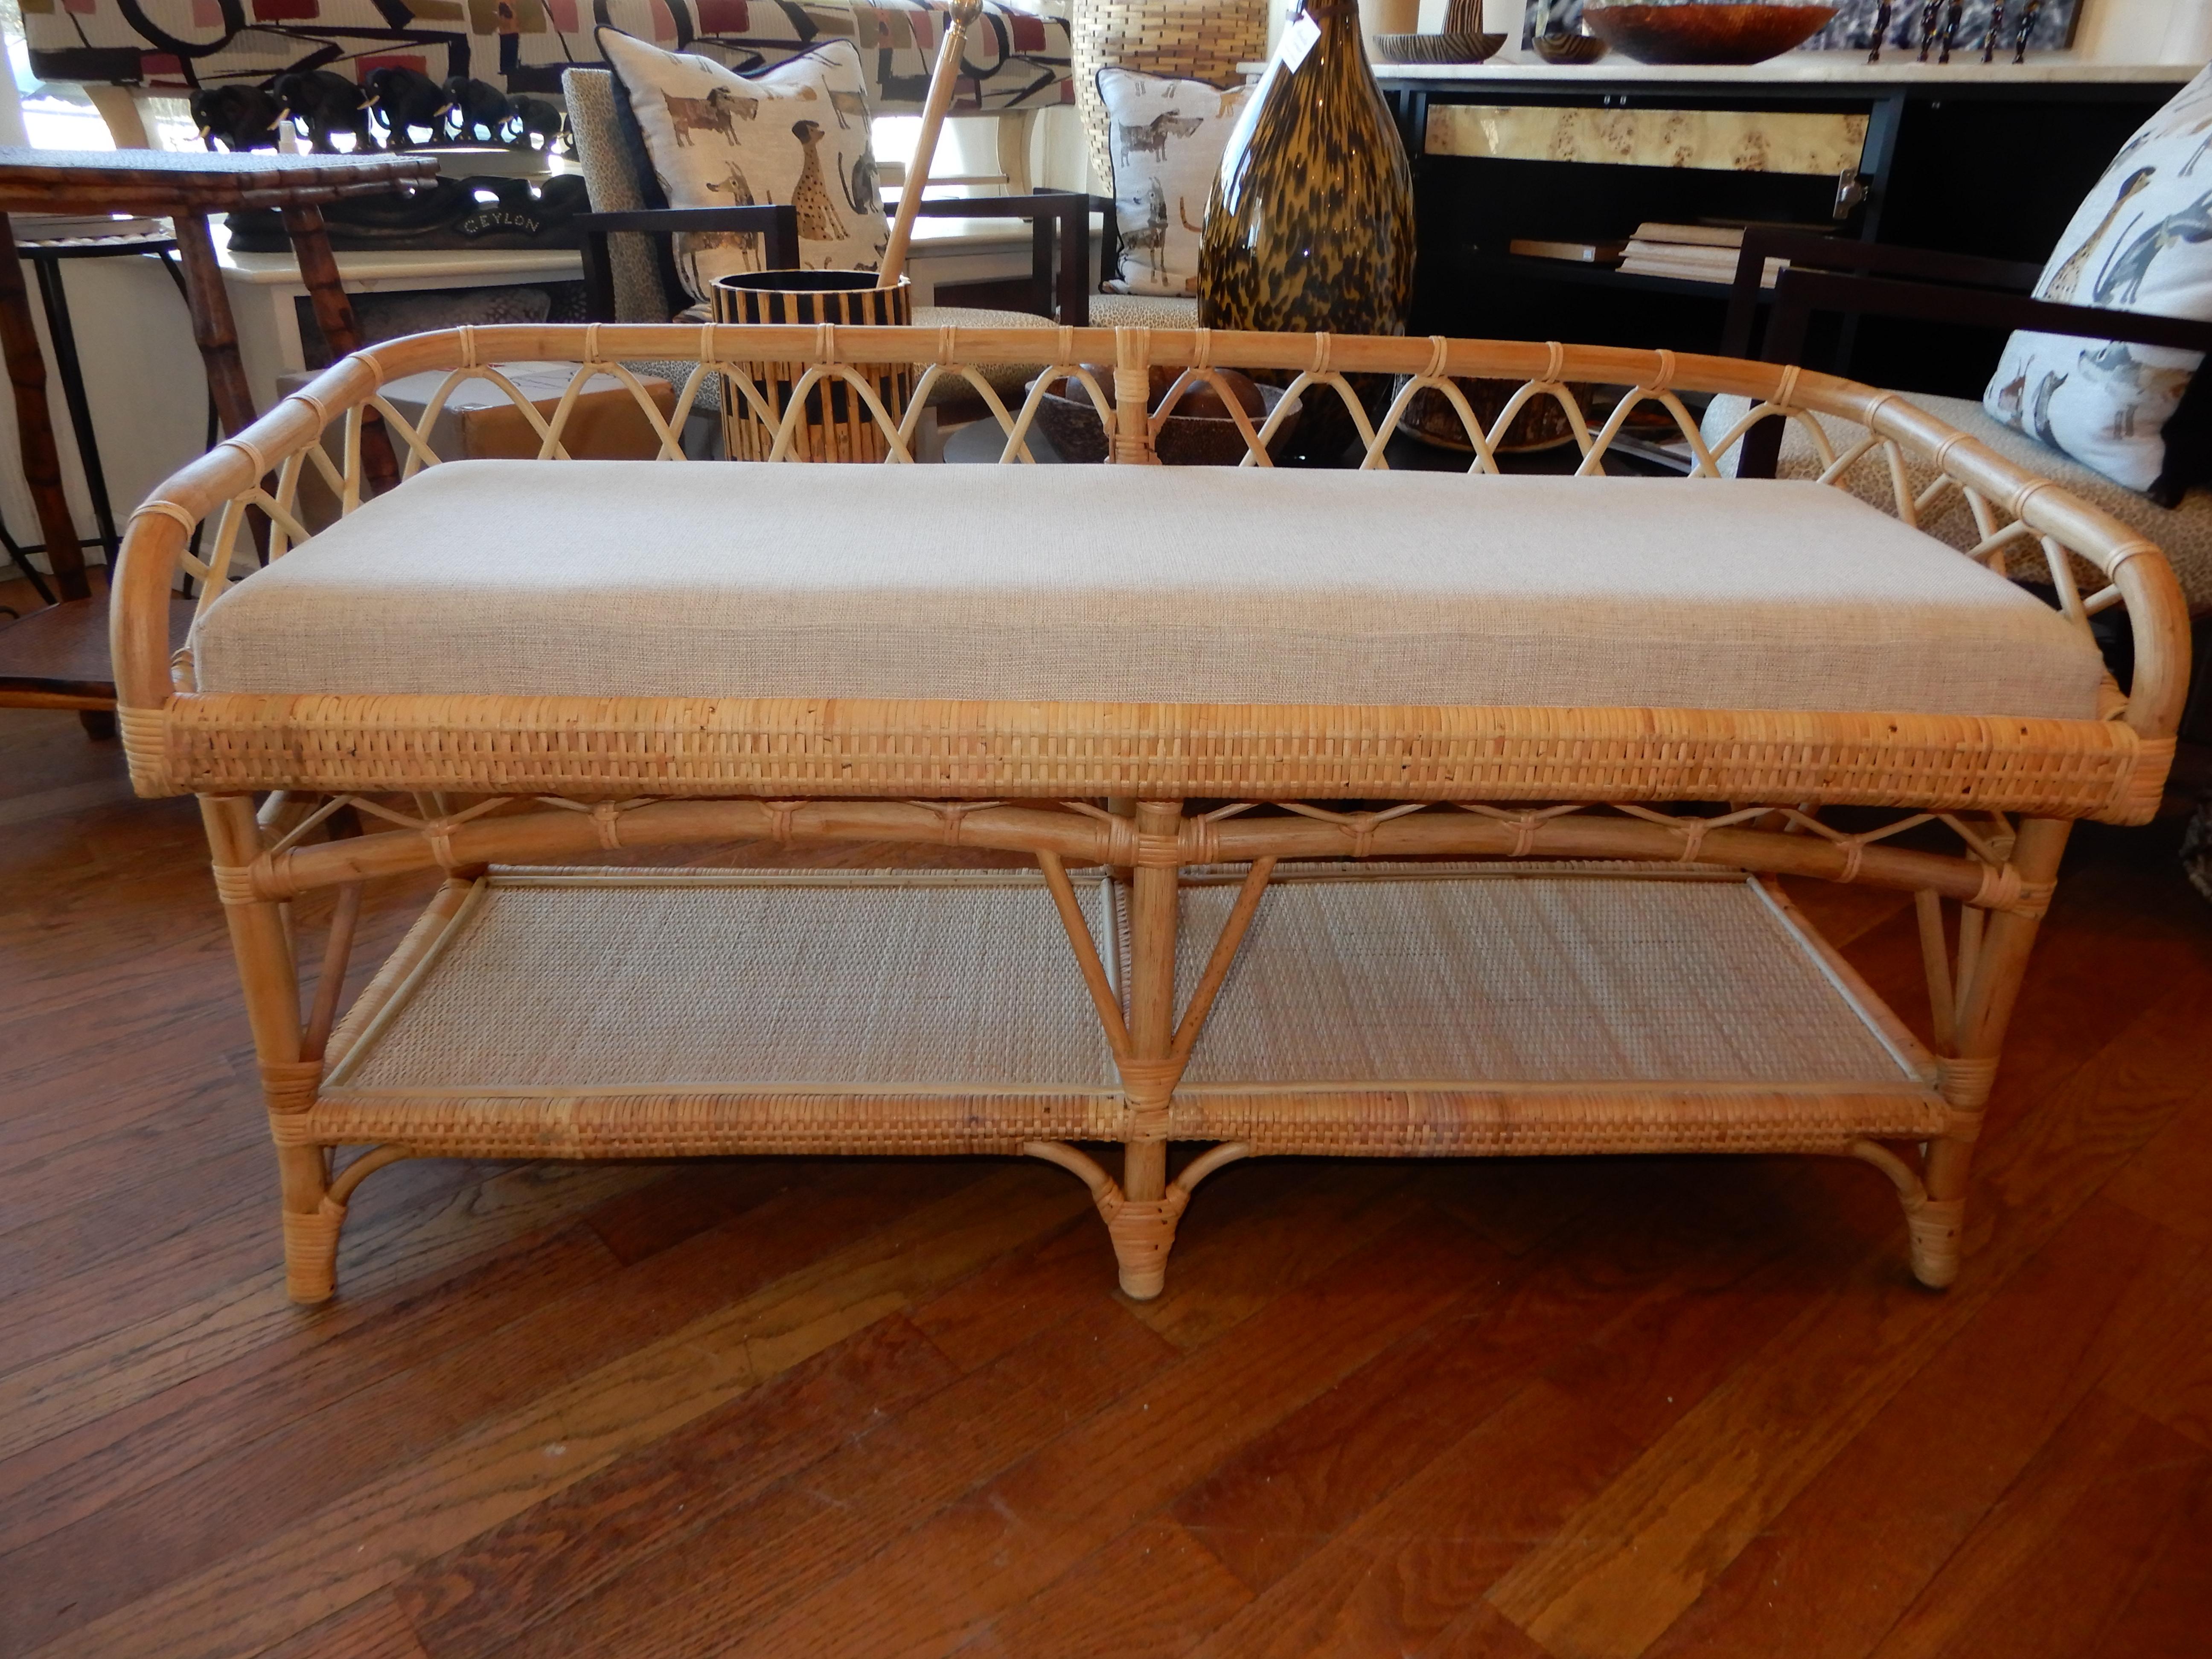 The Carolina Bench beautifully hand crafted in Spain of bamboo and cane. The seat is covered in a sunbrella natural tone fabric. The bottom level is great for books, shoes, towels depending on where you want the bench to work best for you. Great in